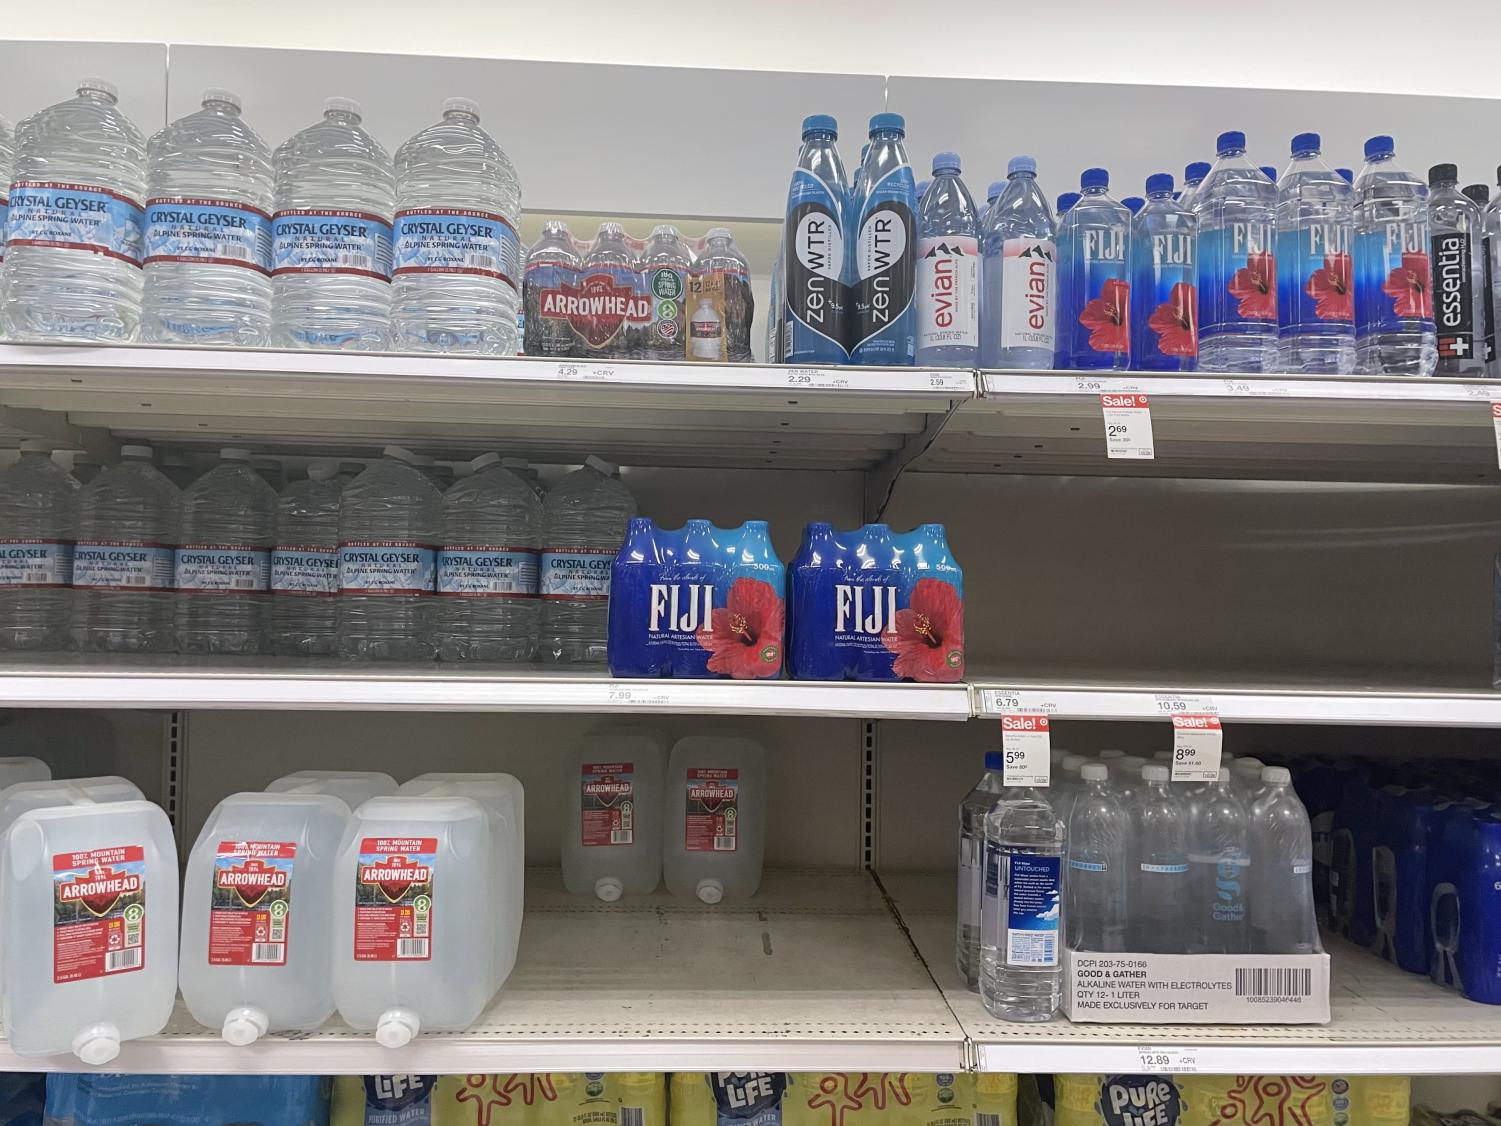 What Company Makes Costco's Kirkland Brand Bottled Water?